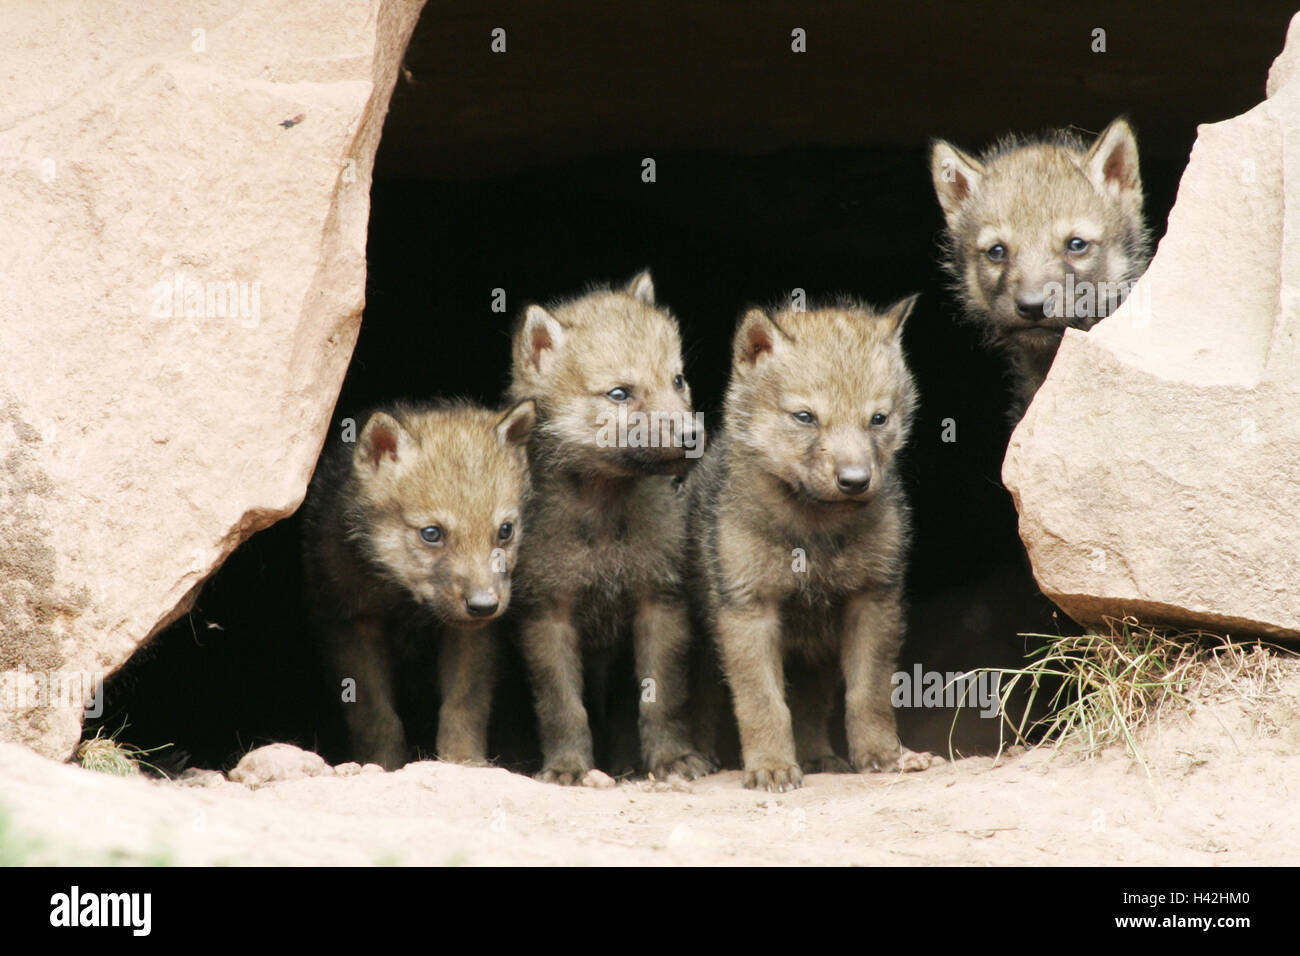 Enclosure, rocks, pit, grey wolves, Canis lupus, puppies, curiously, animals, wild animals, mammals, predators, doggy, Canidae, grey wolf, wolves, young animals, boys, attention, interest, curiosity, animal babies, young animals, animal family, outside Stock Photo